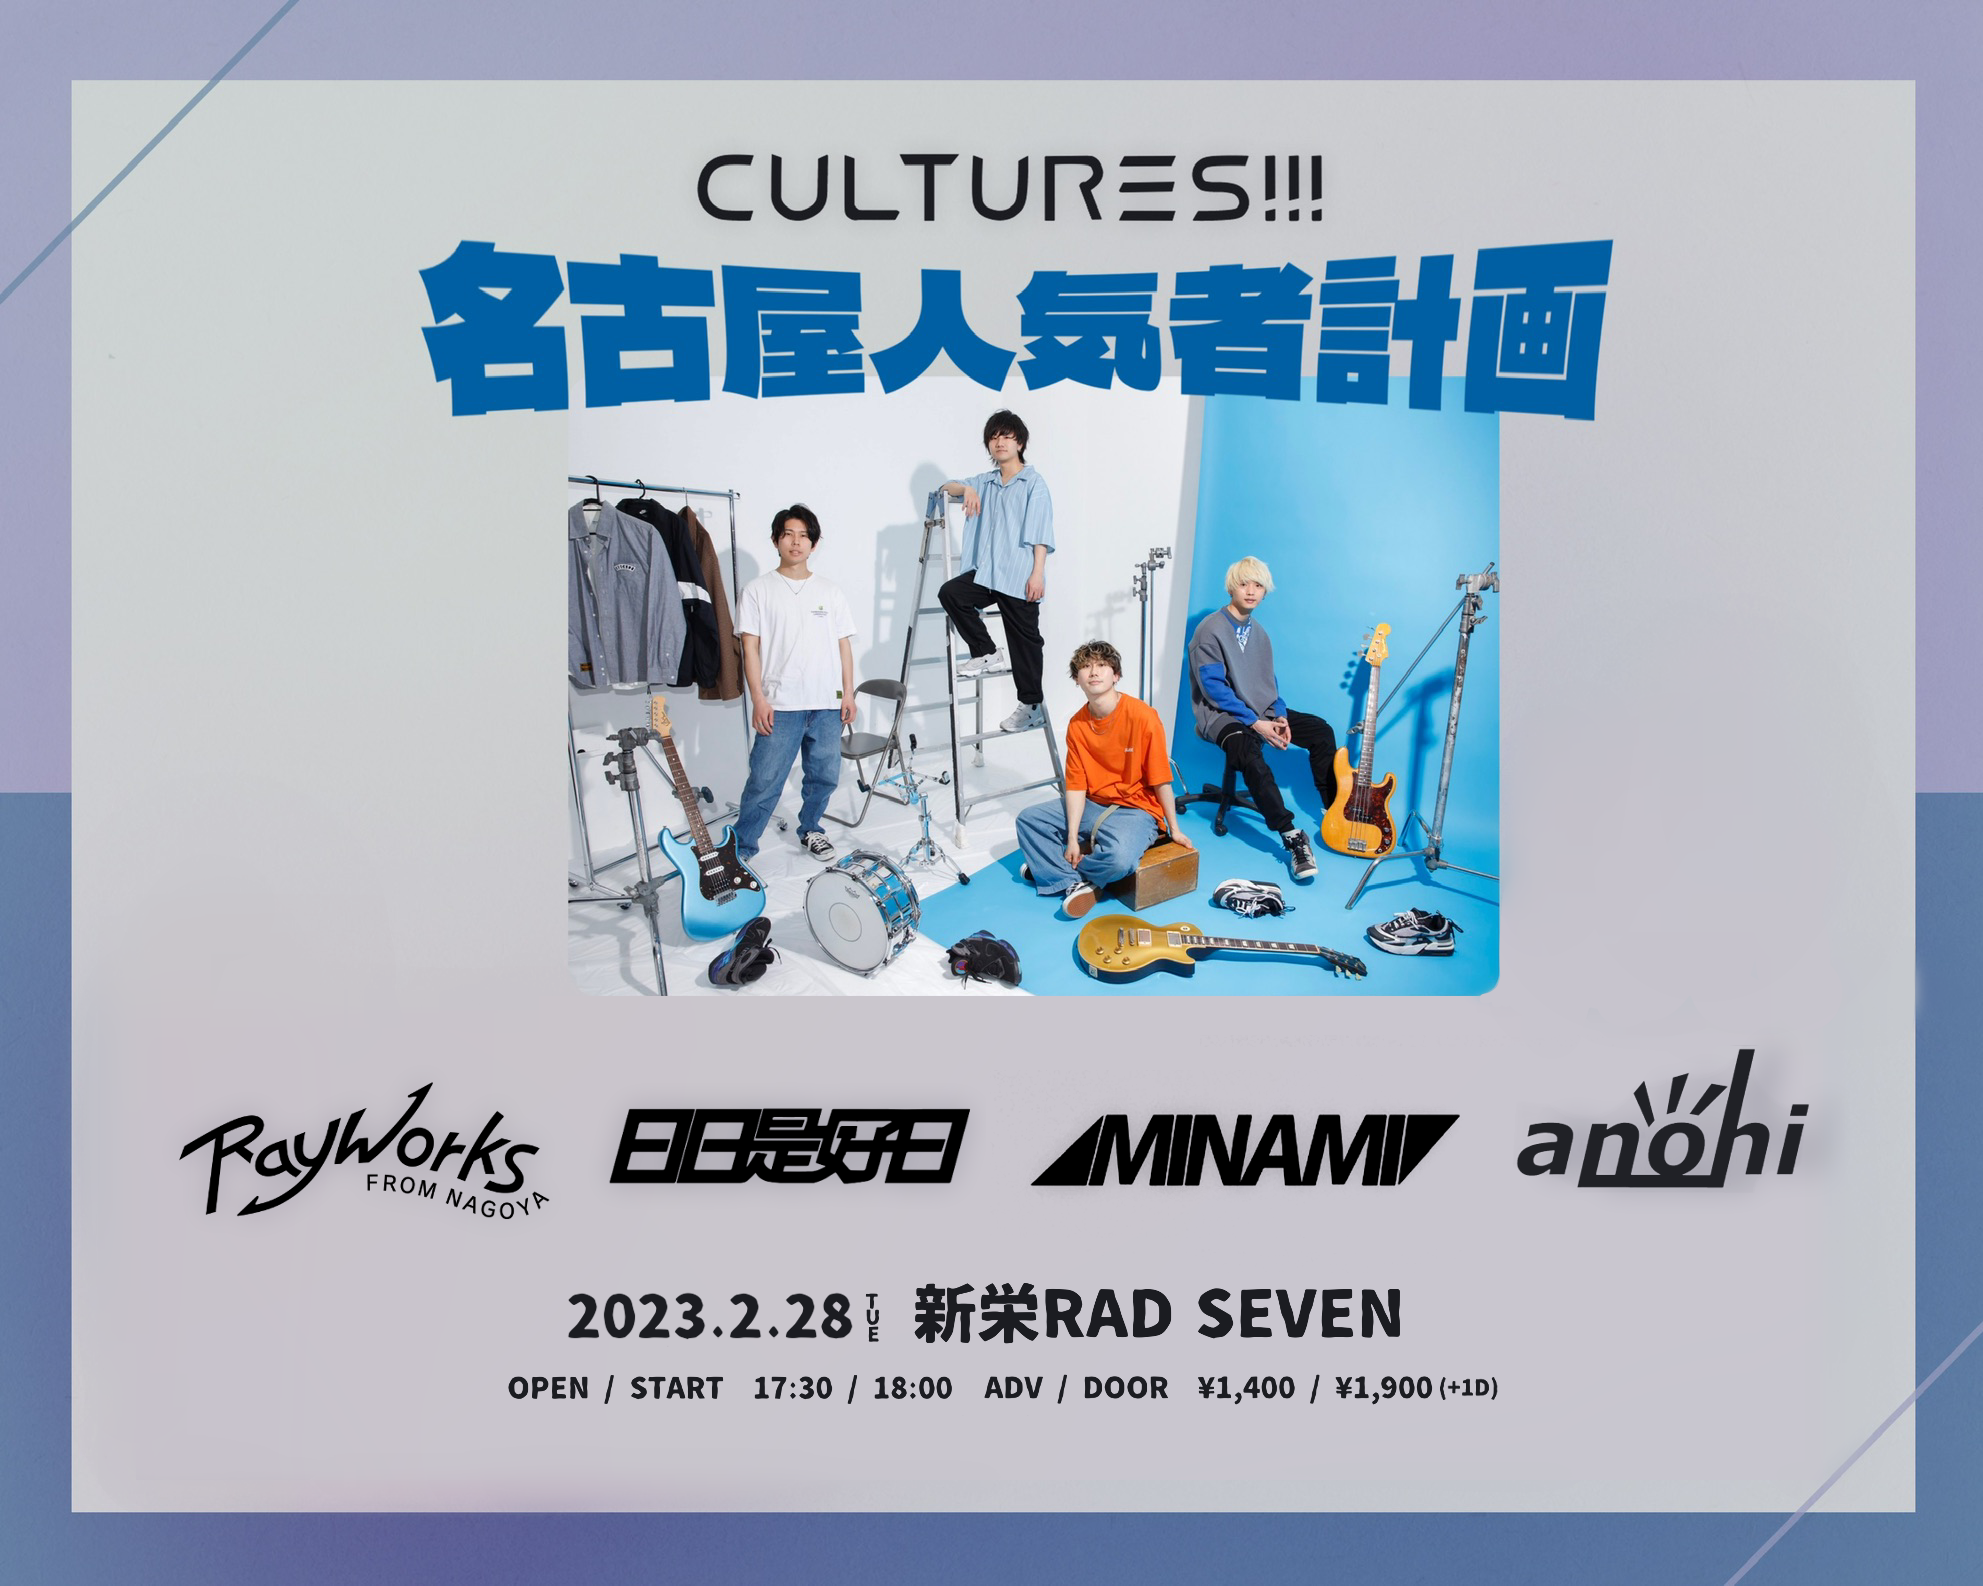 CULTURES!!!名古屋人気者計画